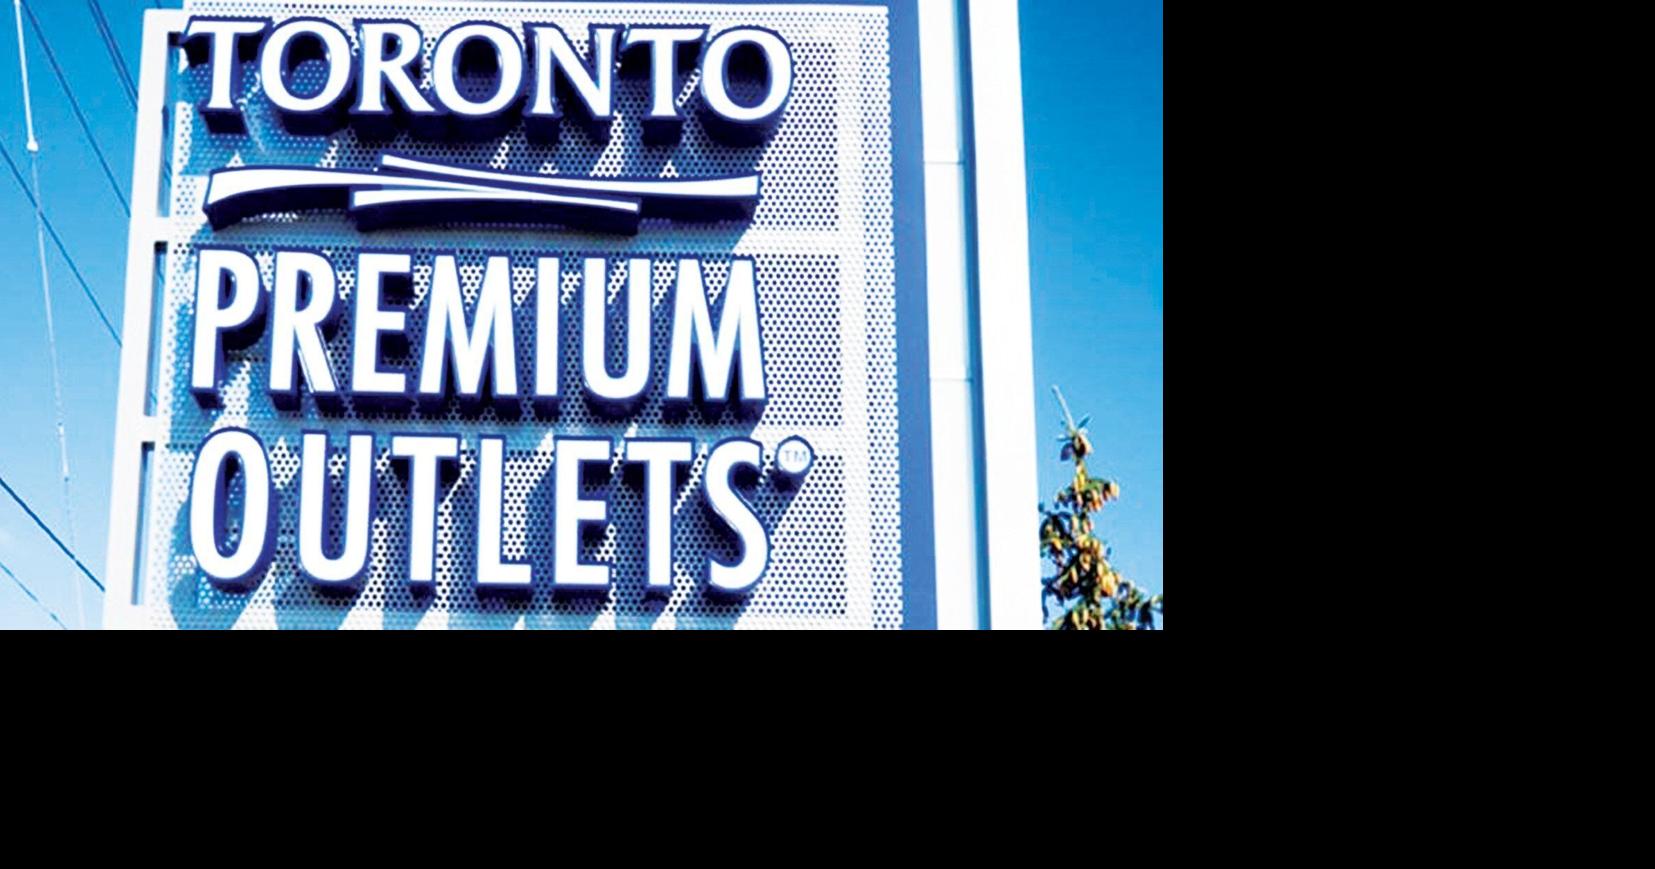 Can't be missed': Traffic around Toronto Premium Outlets in Halton Hills  will be busy this weekend with 'blowout' deals